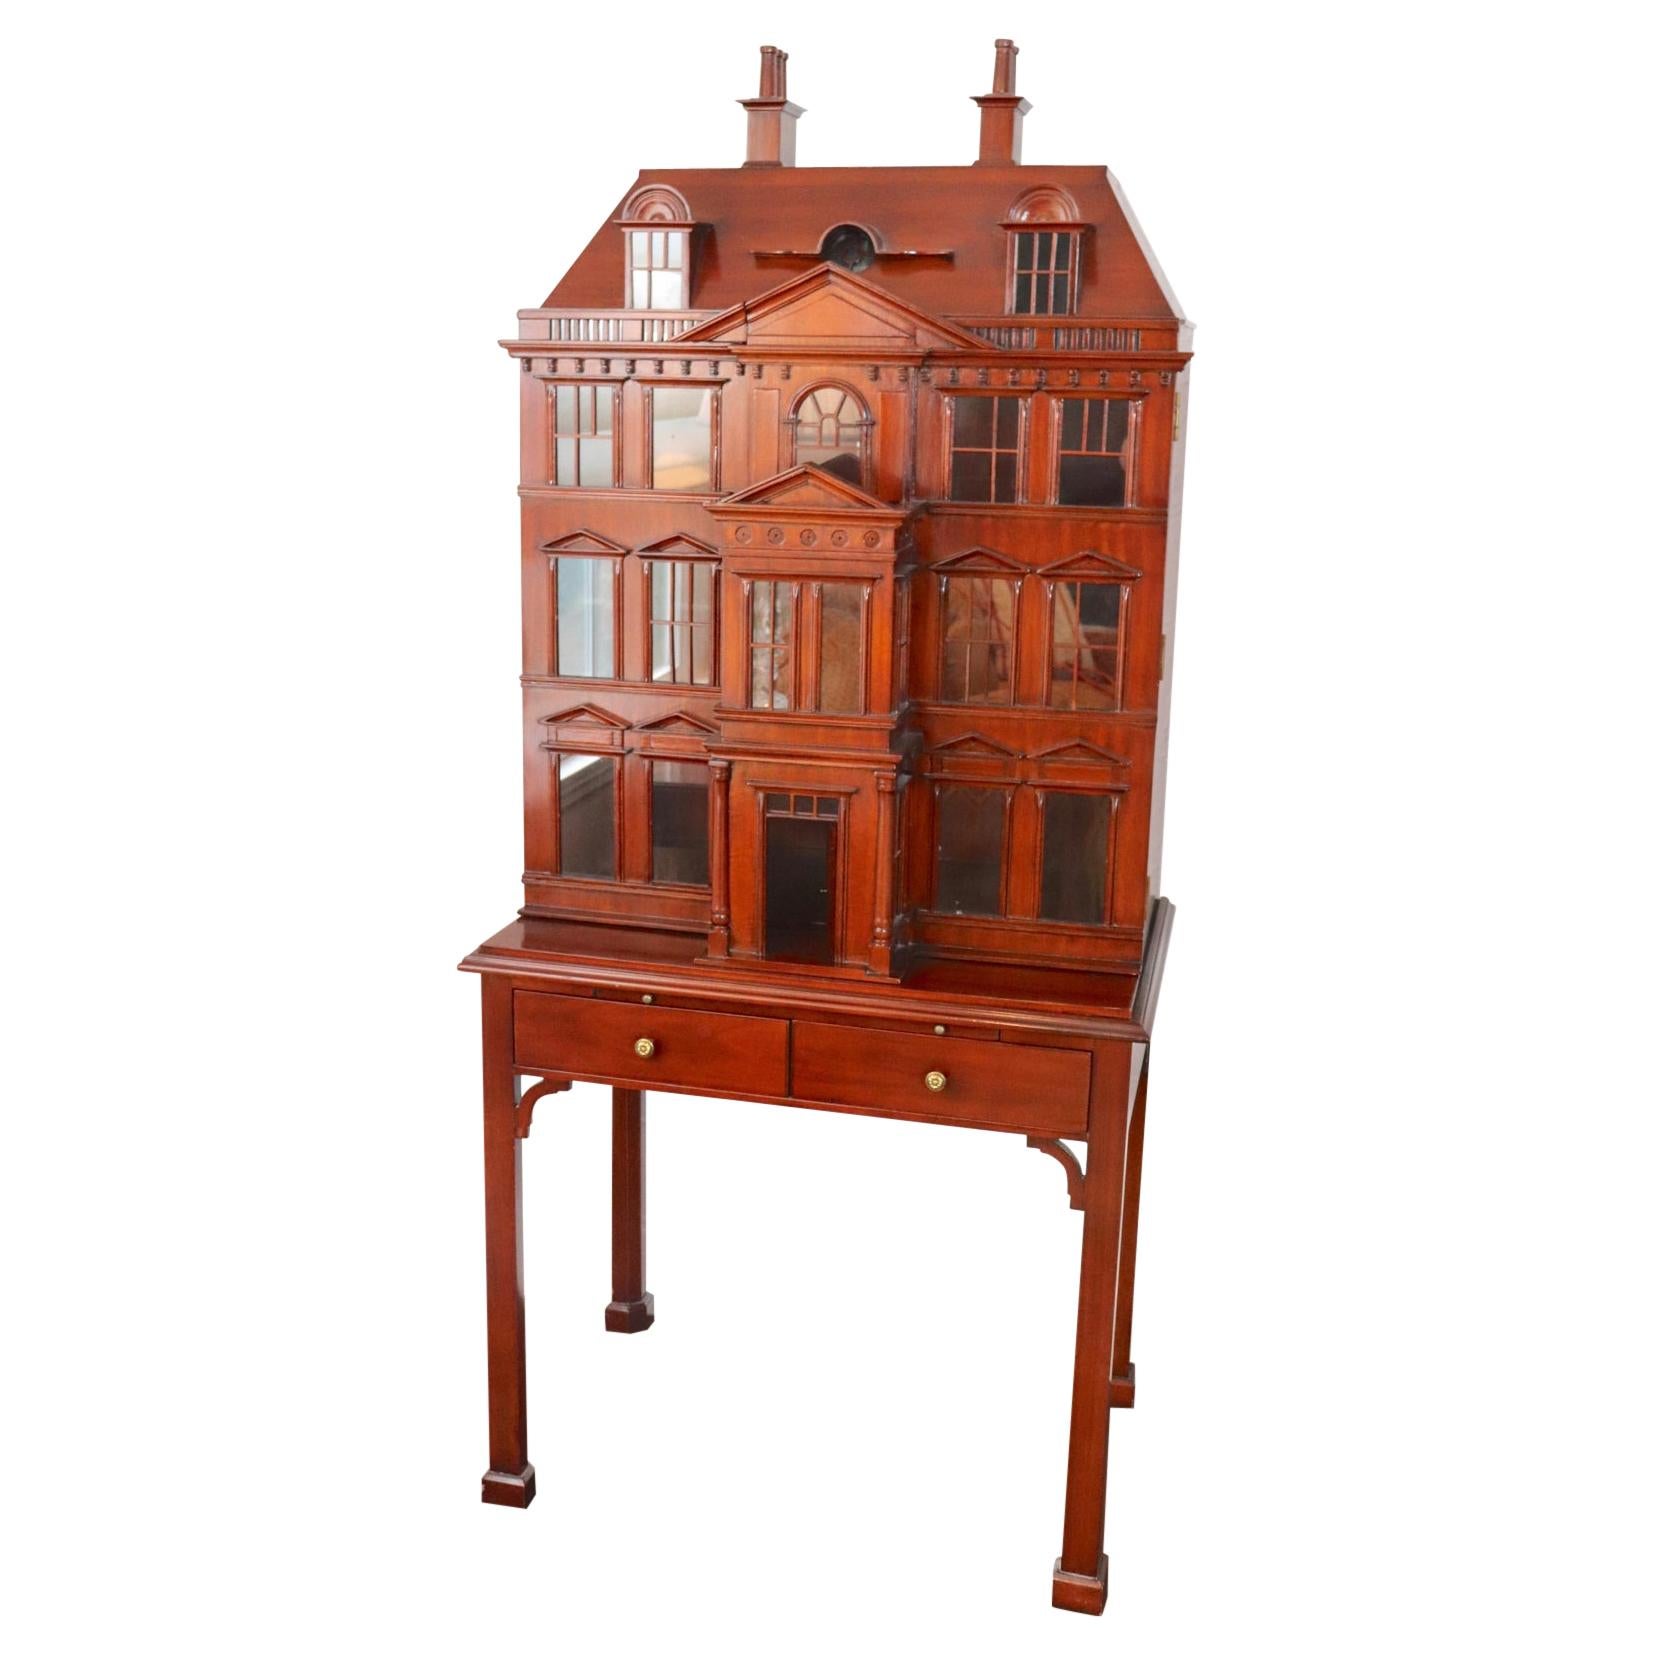 Maitland Smith iconic Postmodern Victorian Dollhouse bar cabinet cupboard. Incredible detail with glass windows, copper mullions and hand carved architectural details. Heavy glass interior shelf. Embossed leather slide. Labelled. 
   